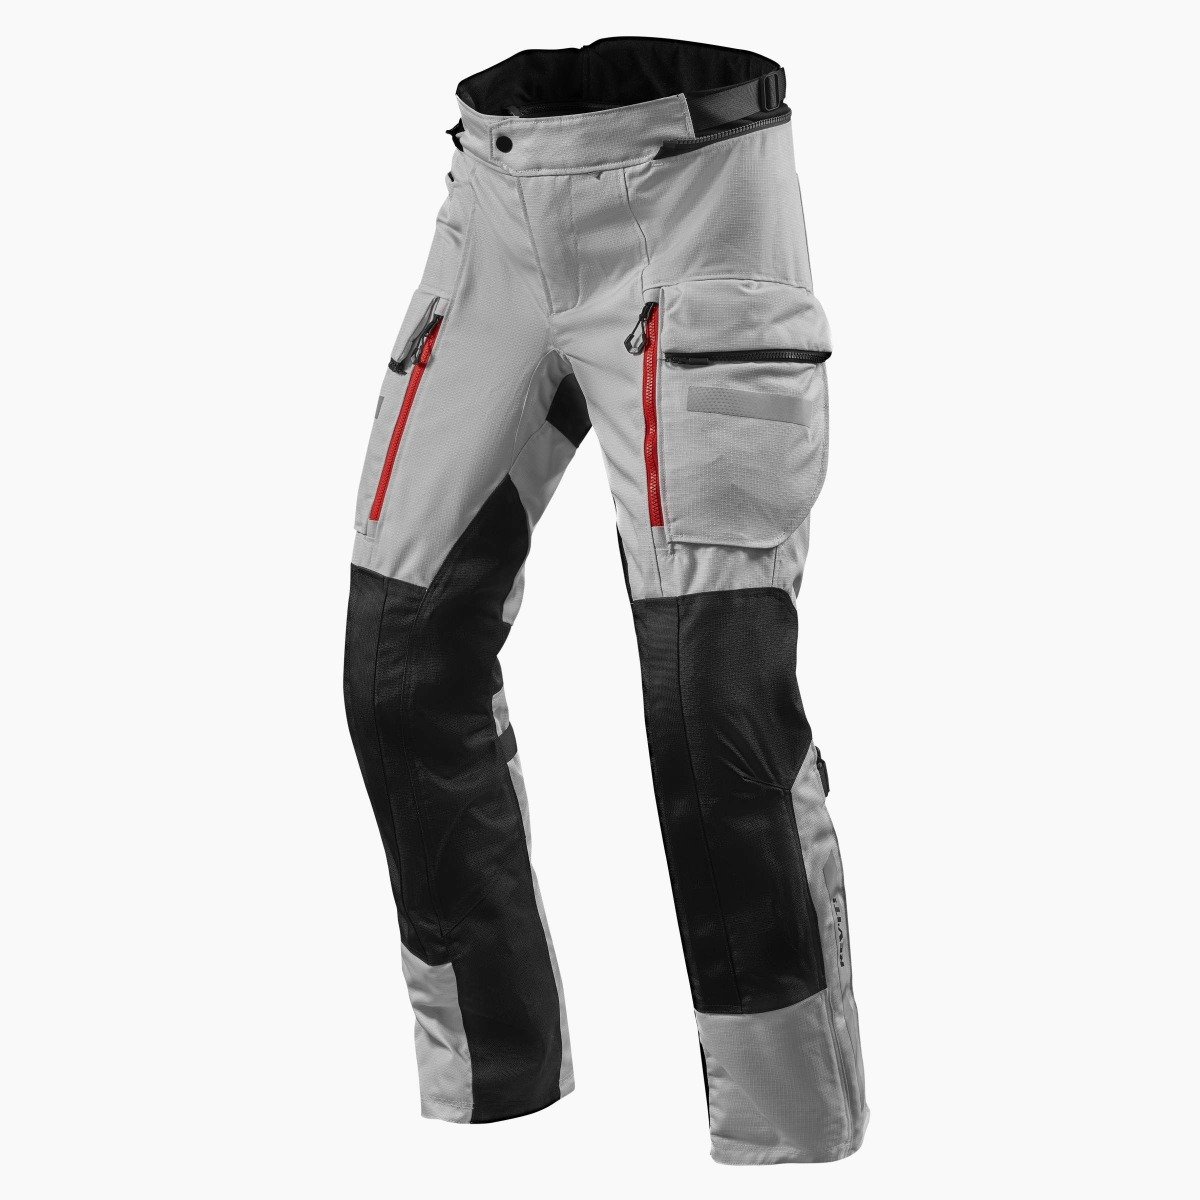 Image of REV'IT! Sand 4 H2O Short Silver Black Motorcycle Pants Size M ID 8700001316491